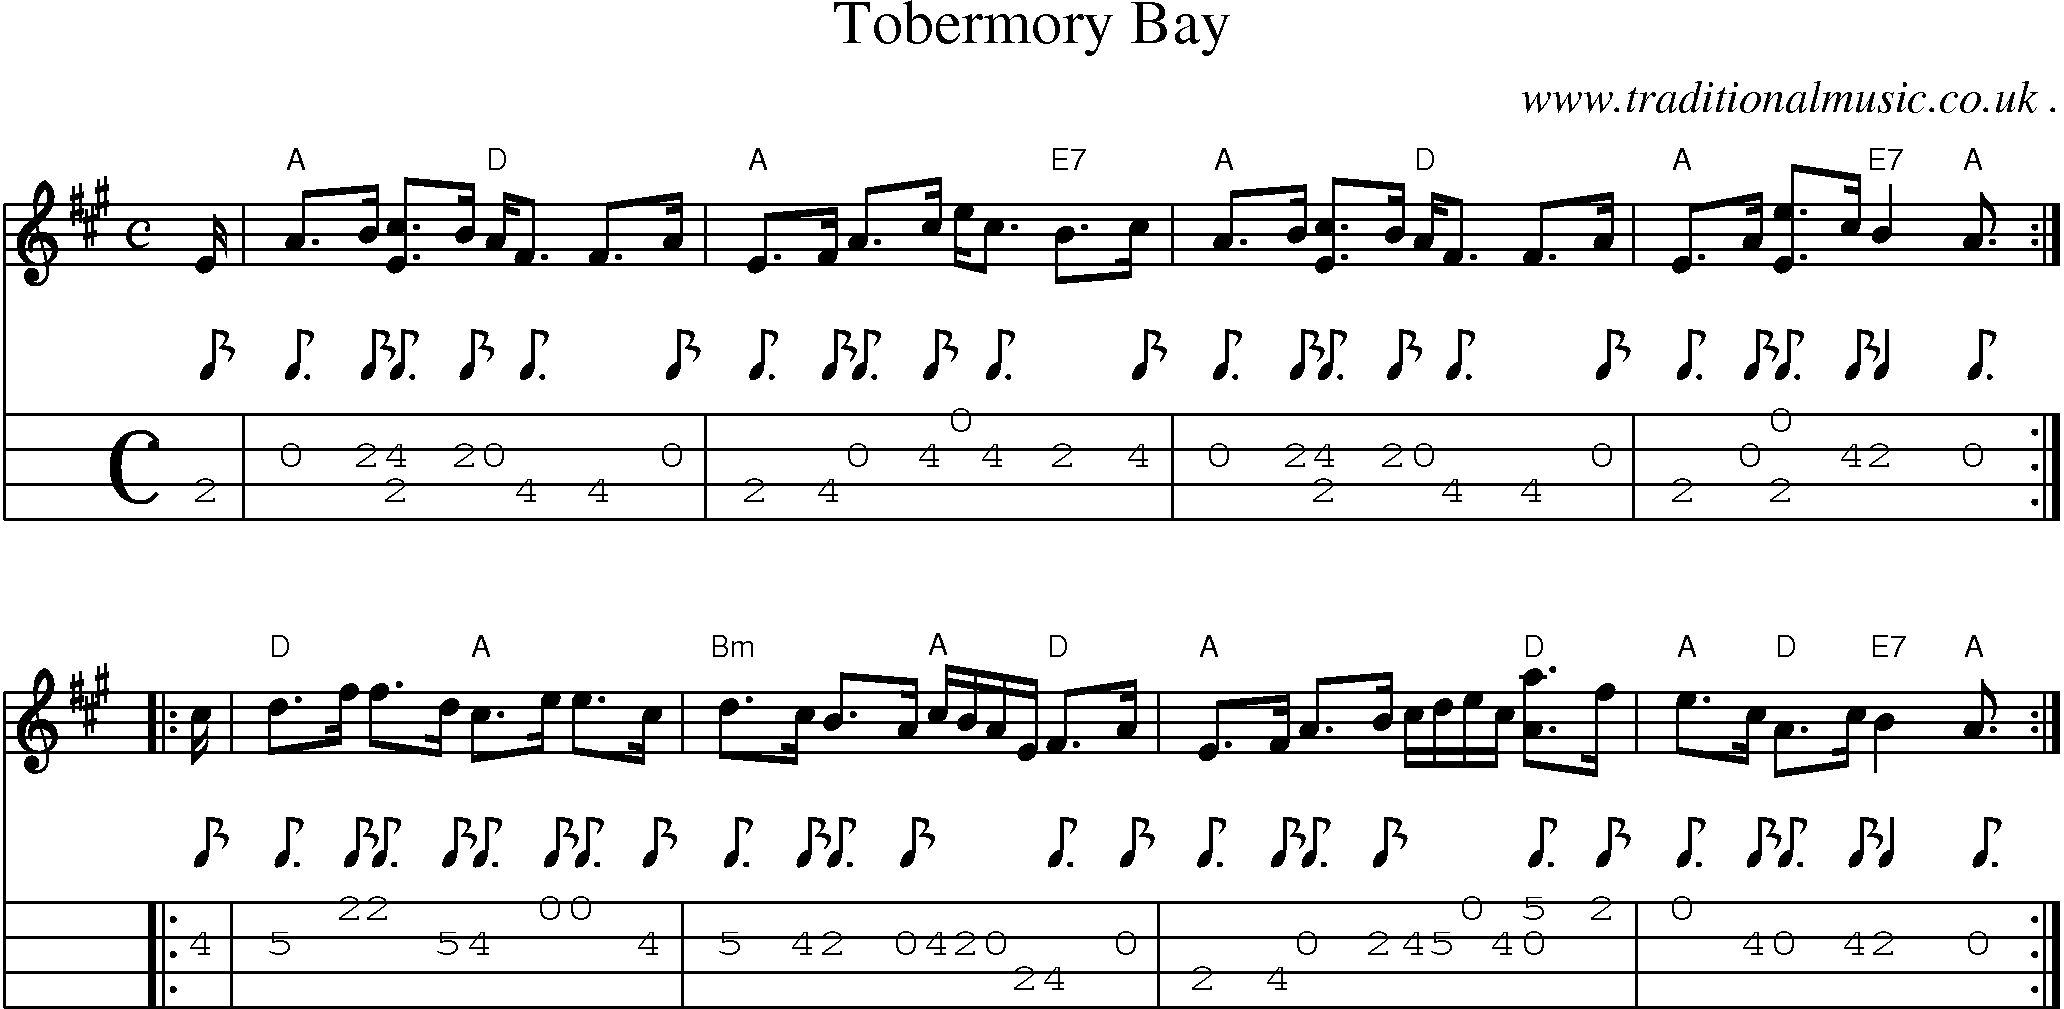 Sheet-music  score, Chords and Mandolin Tabs for Tobermory Bay